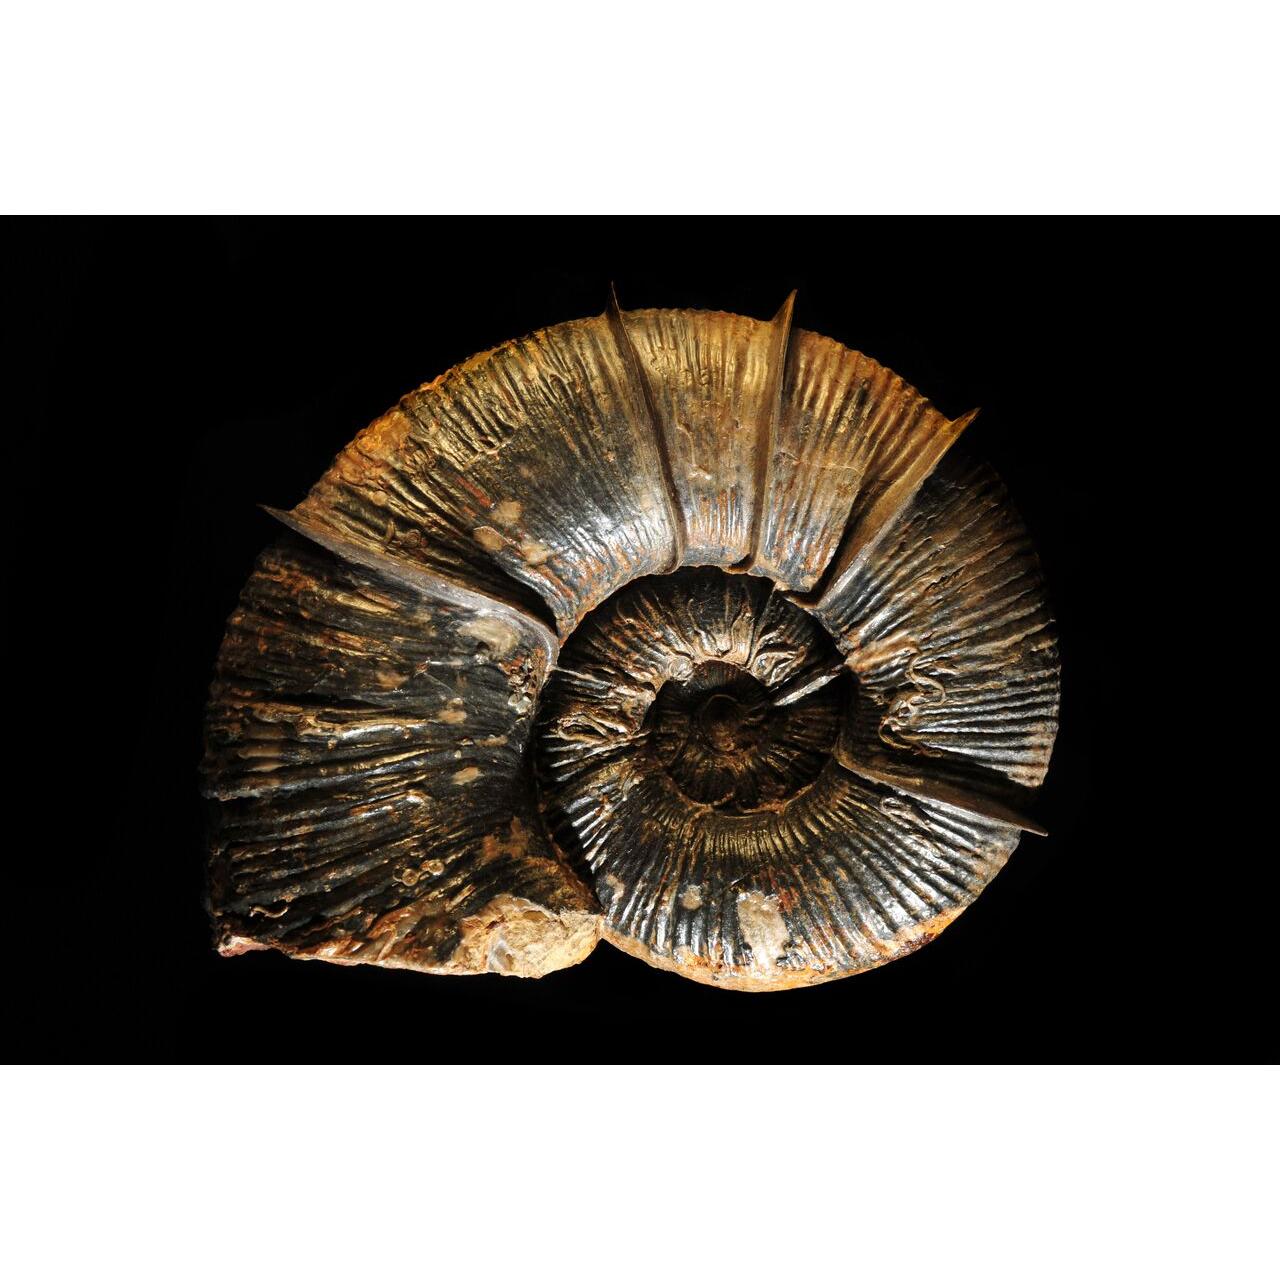 This is a picture of a dramatically lit winged ammonite. It has very prominent, sharp ridges.